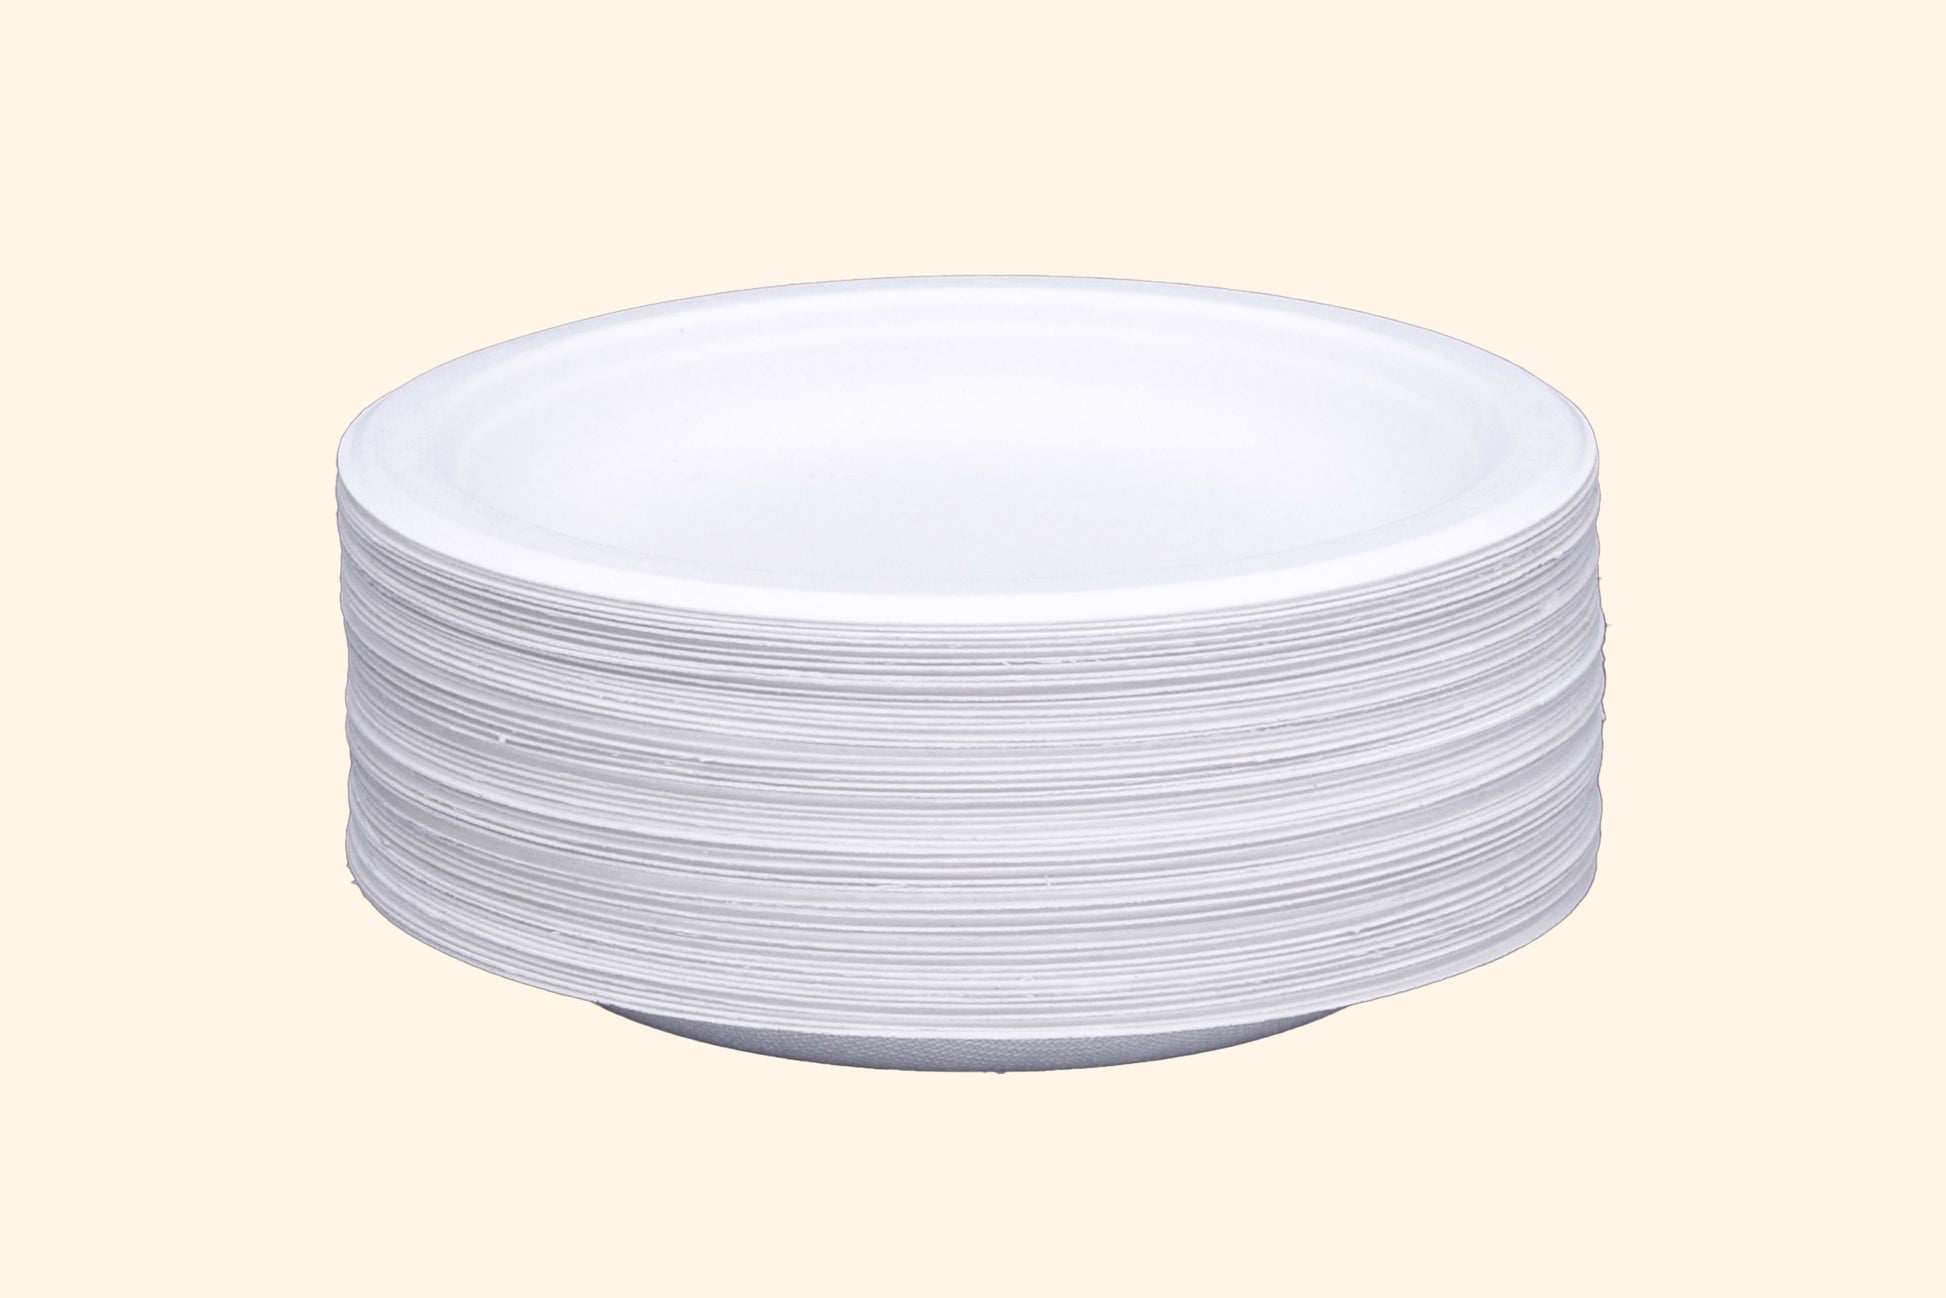 6-Inch-Round-Plates-Compostable-Sugarcane-Bagasse-Plate